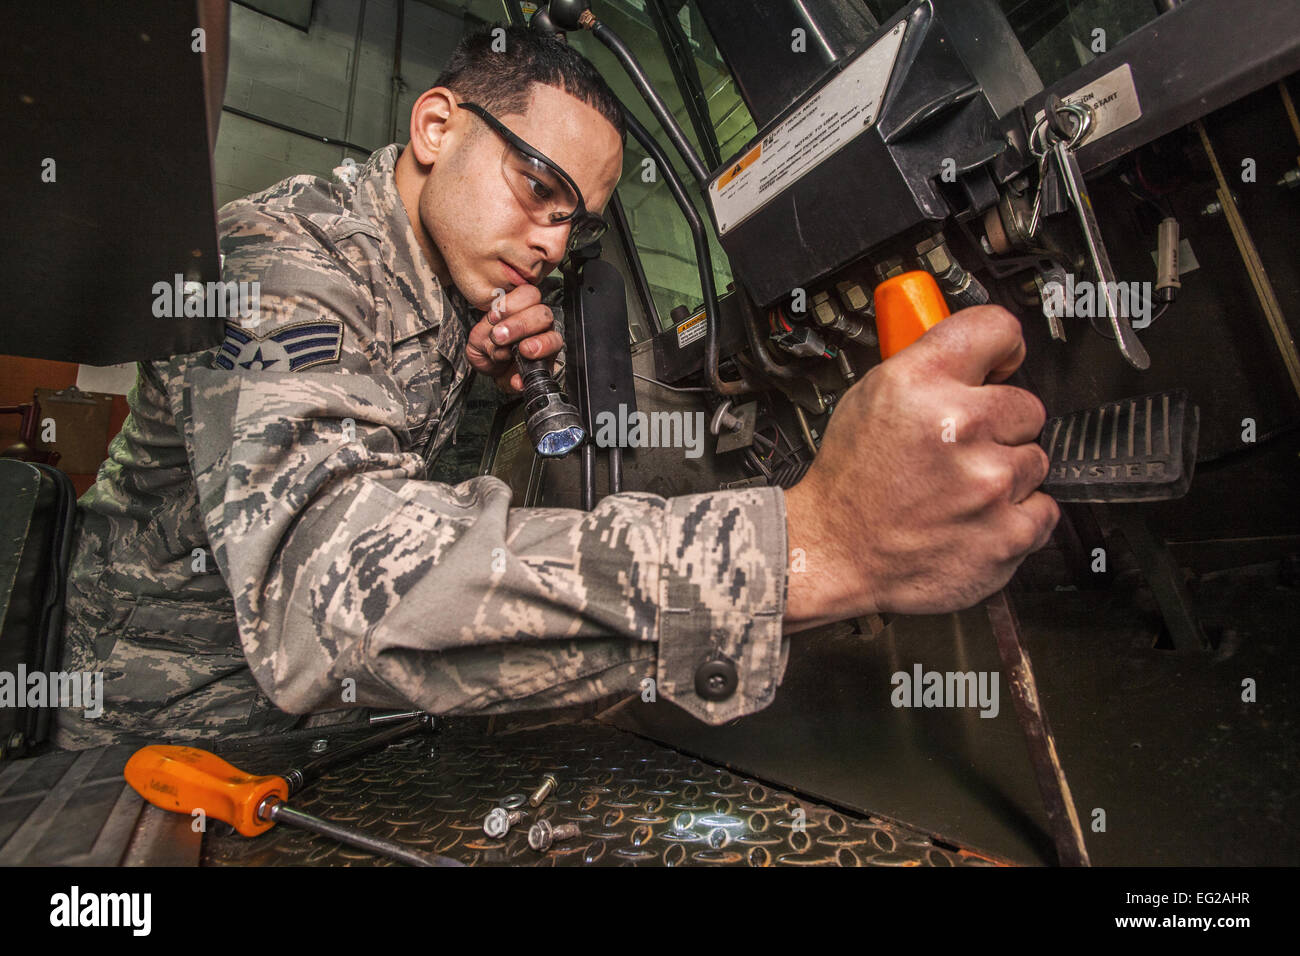 Senior Airman Christopher Garcia removes a panel to fix a neutral start switch on a 10K forklift Jan. 10, 2015, on Joint Base McGuire-Dix-Lakehurst, N.J.  Master Sgt. Mark C. Olsen &quot;For more photos from around the Air Force, visit our Facebook page at facebook.com/usairforce.&amp;quot  http://facebook.com/usairforce.&amp;quot  ; United States Air Force Stock Photo